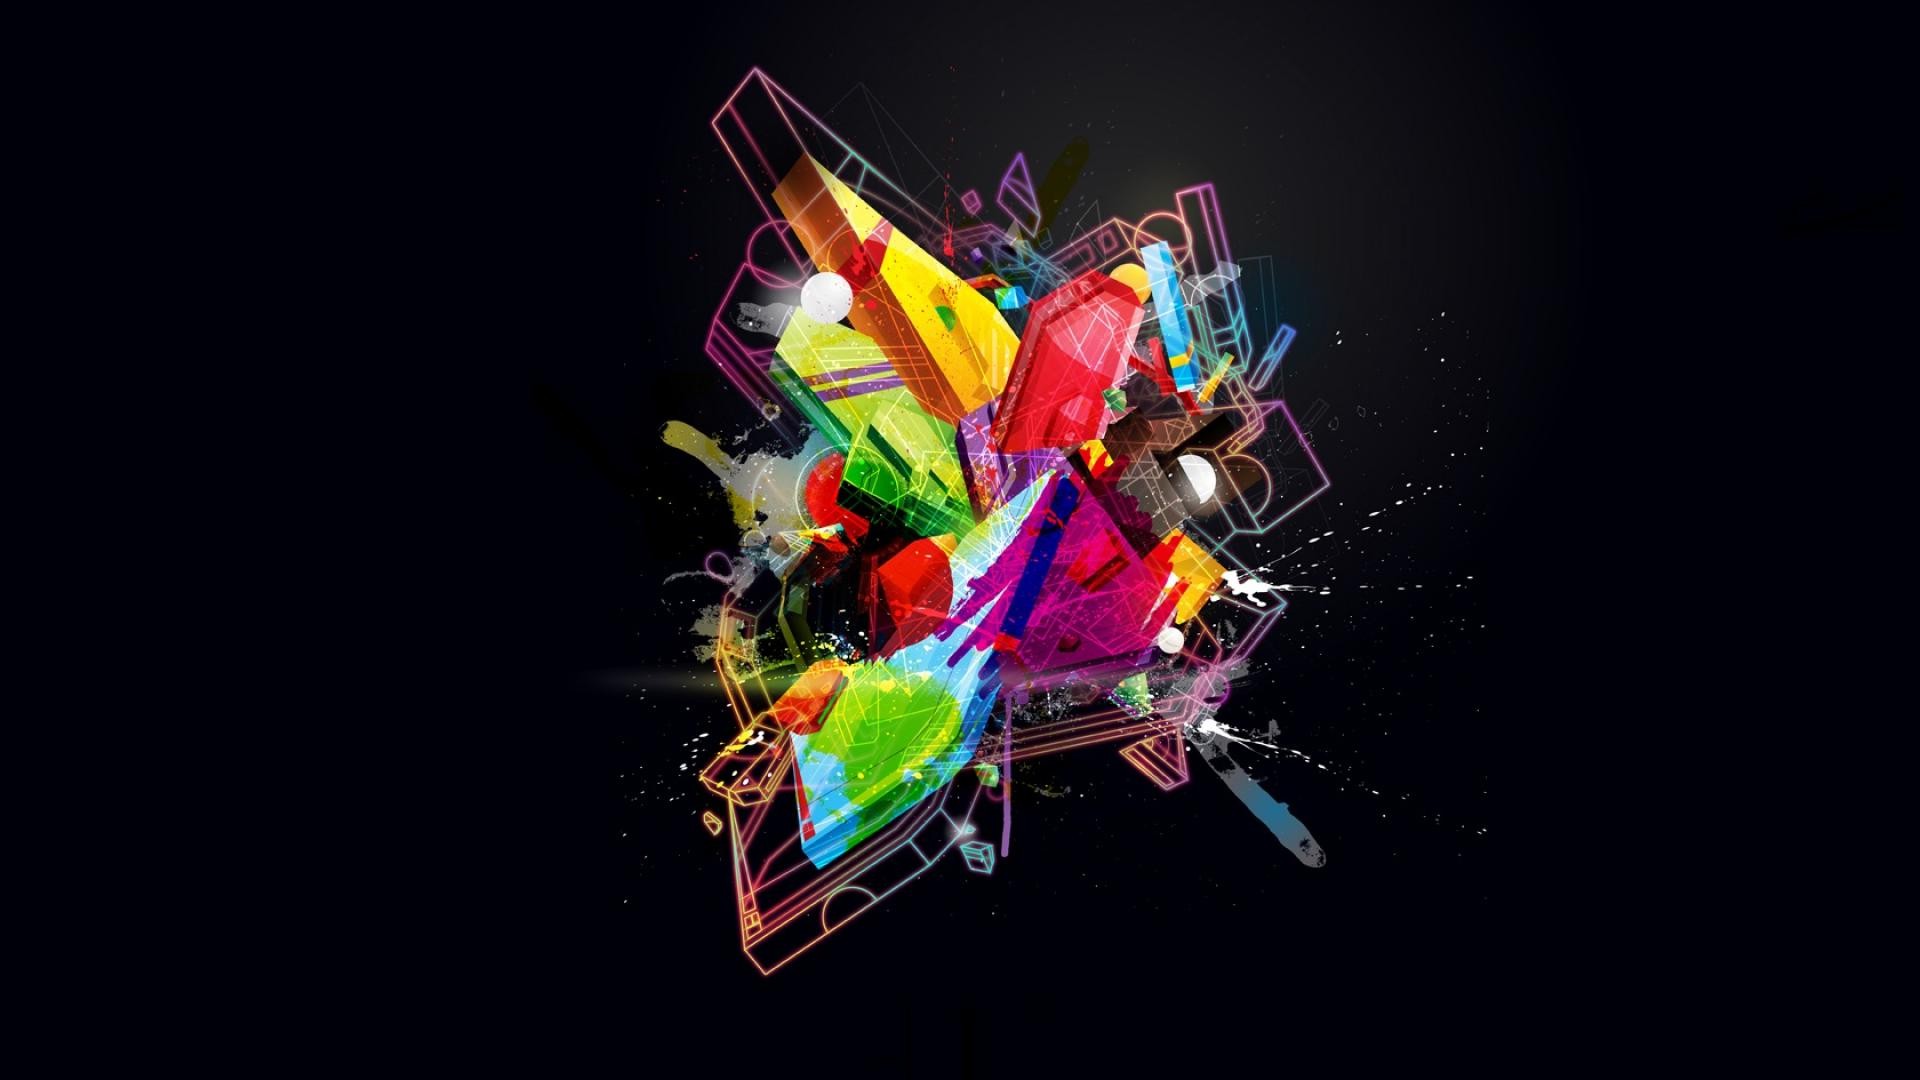 Wallpaper, colorful, digital art, abstract, 3D, space, minimalism, glowing, graphic design, geometry, splashes, ART, graphics, 1920x1080 px, computer wallpaper 1920x1080